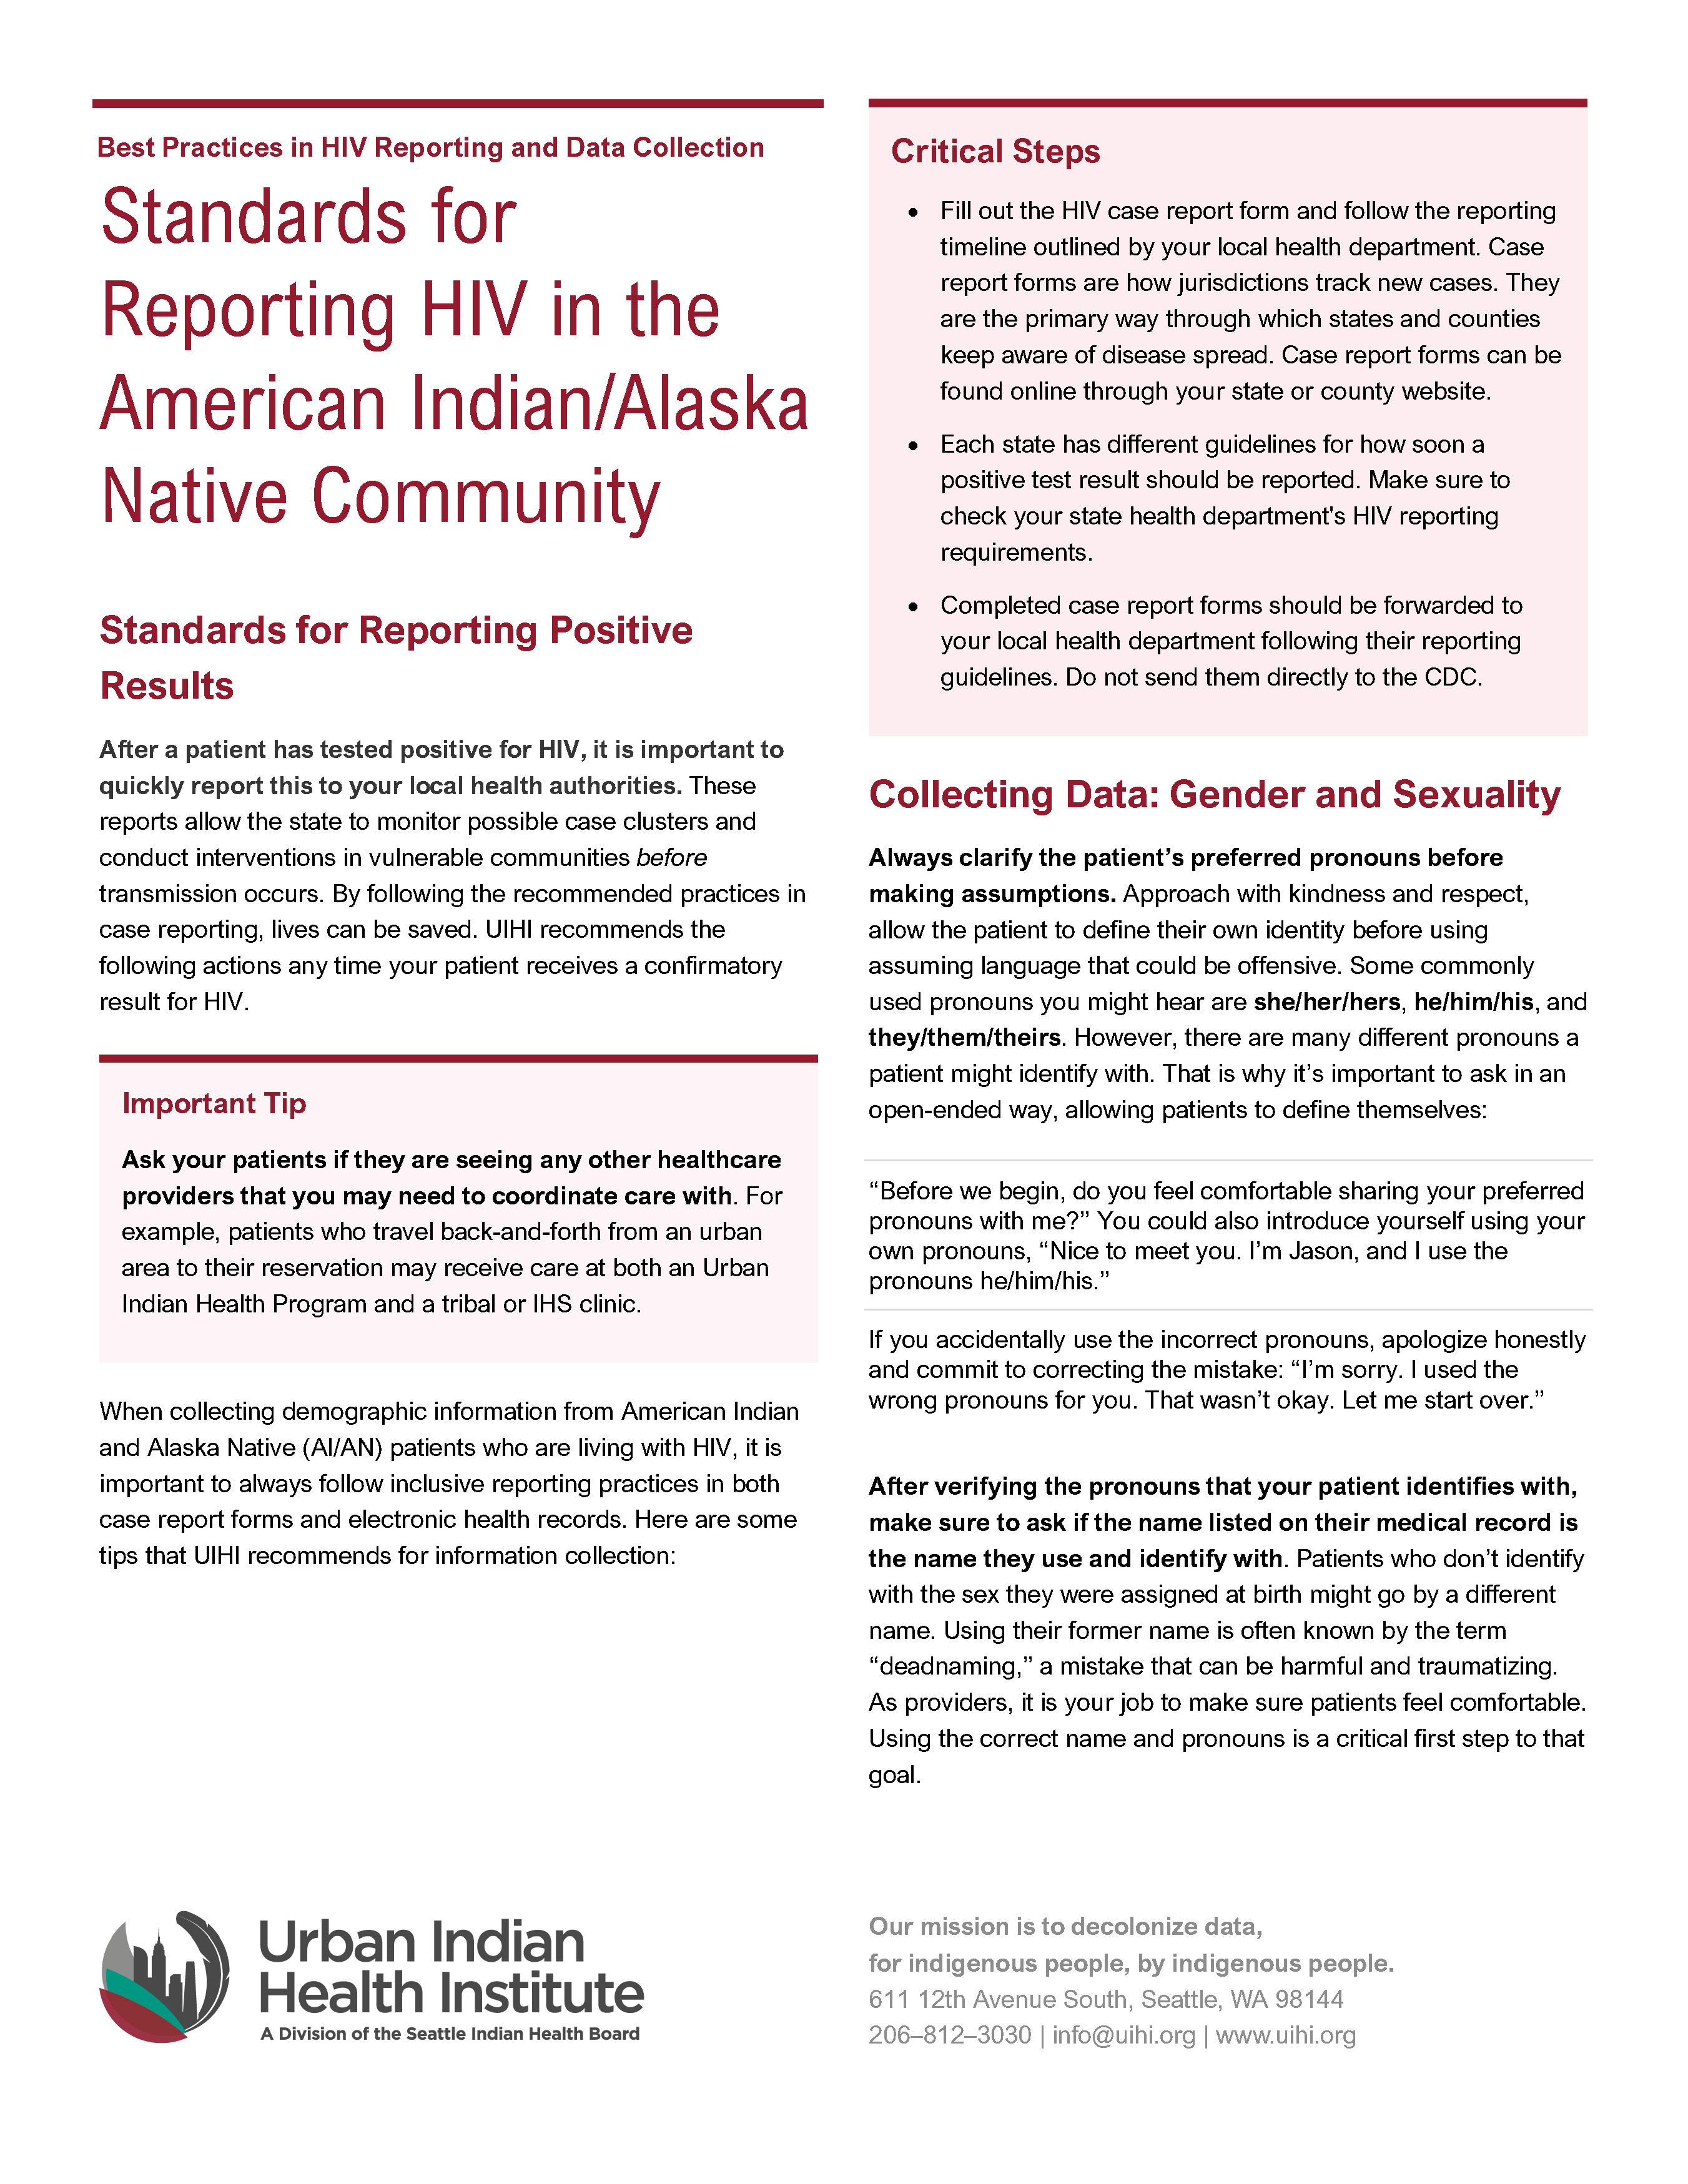 Best Practices in HIV Reporting and Data Collection in American Indian and Alaska Native Communities